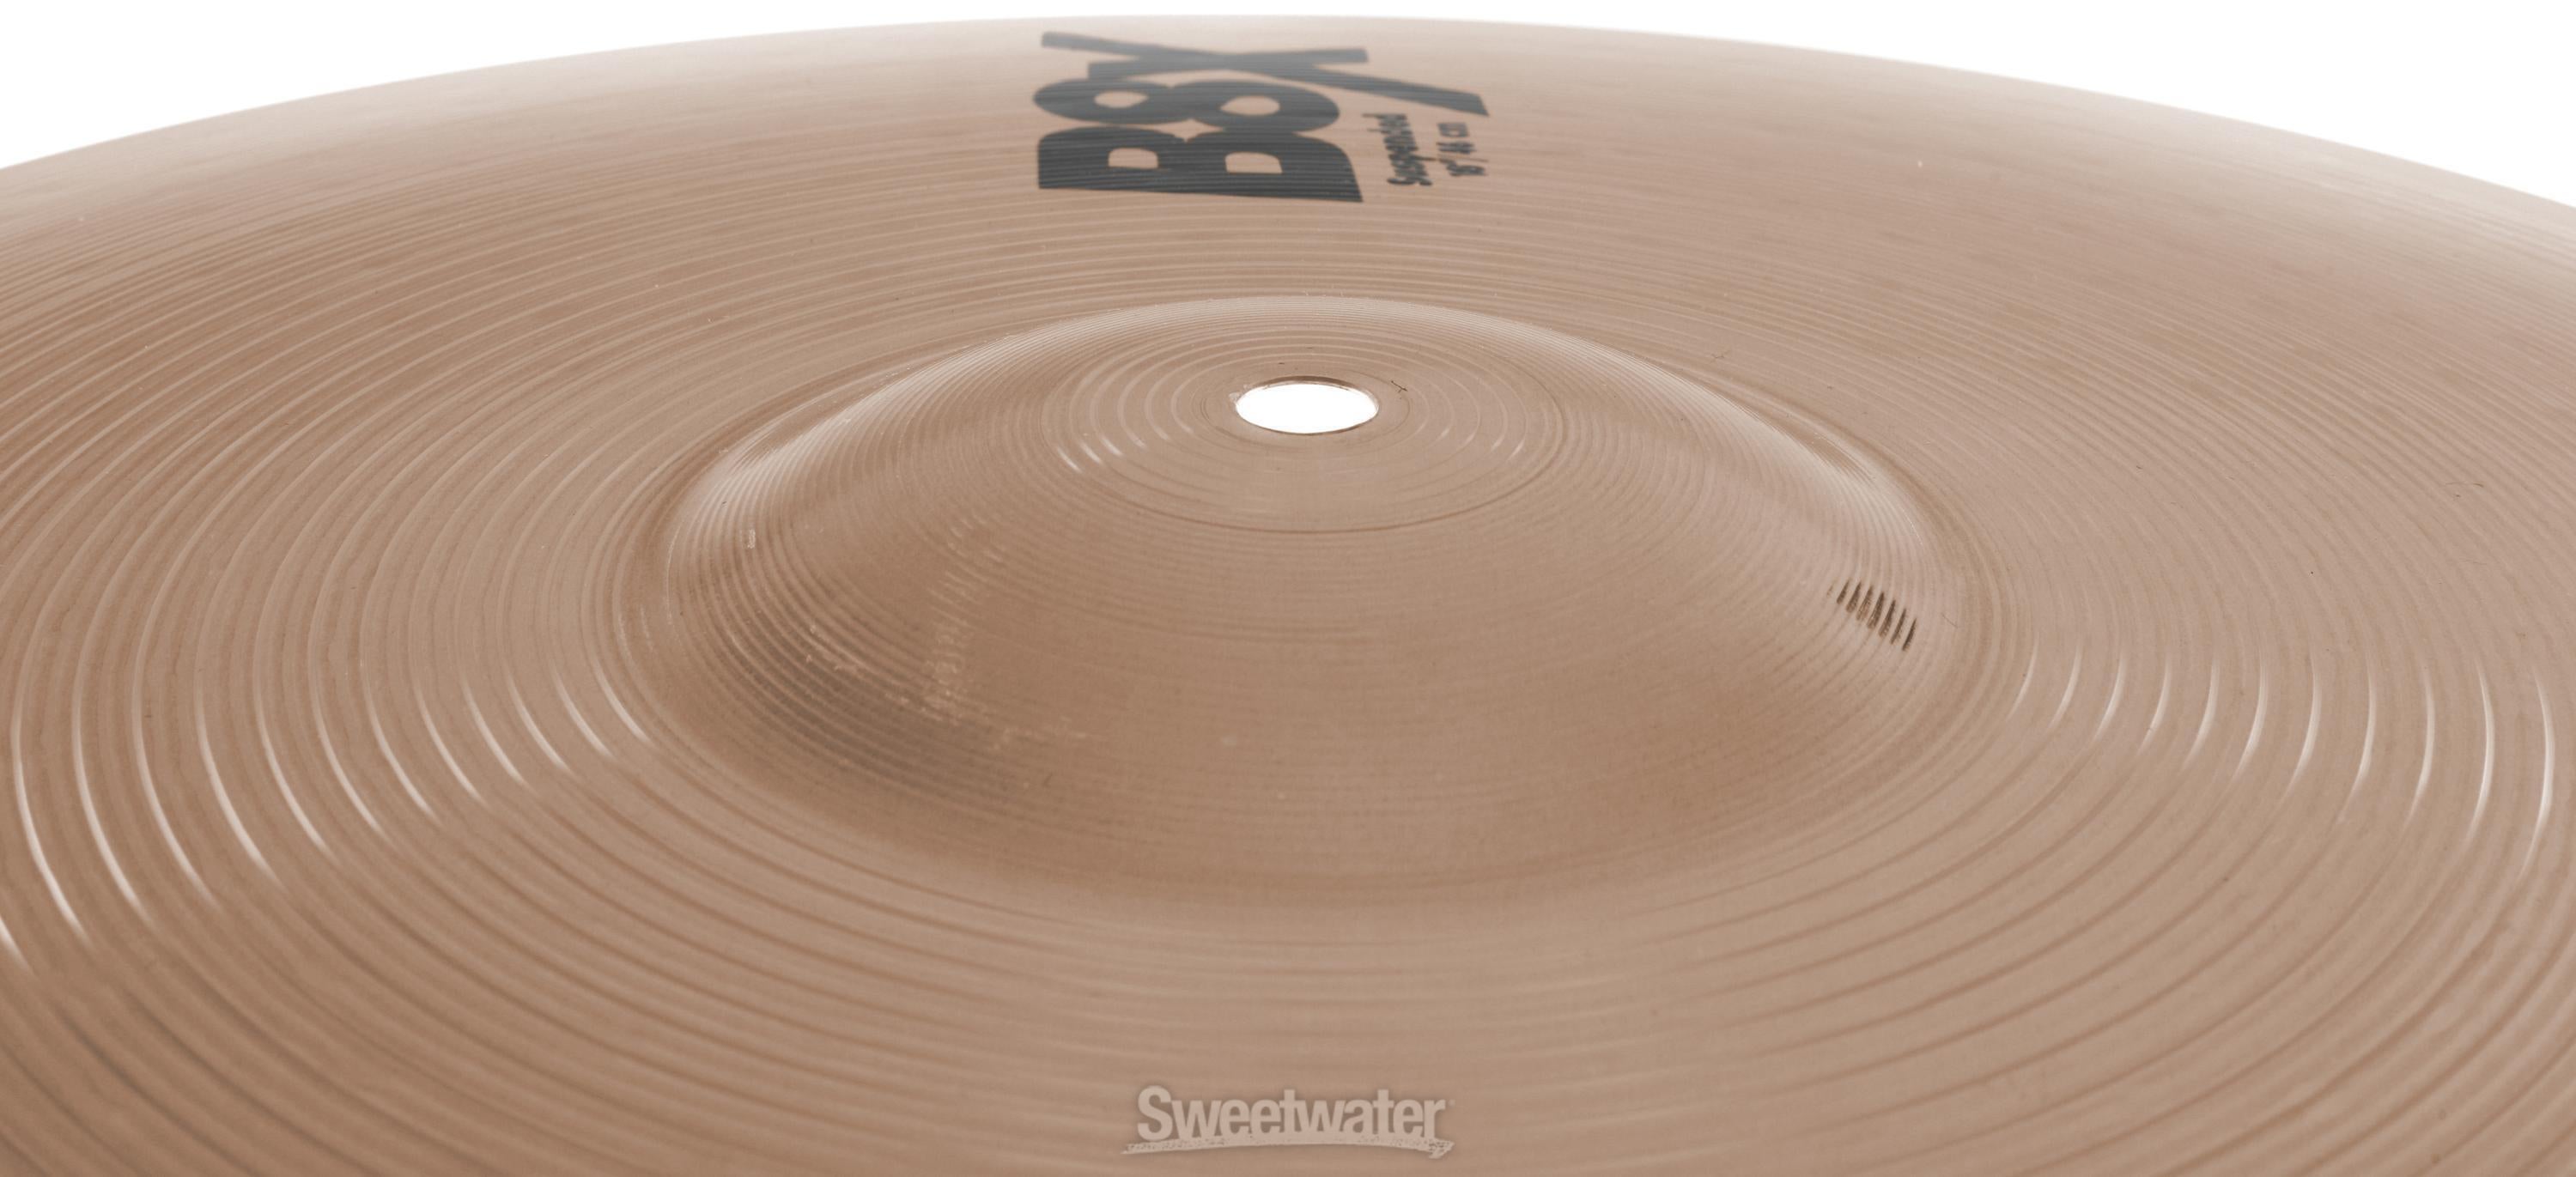 Sabian B8X Suspended Crash Cymbal - 18-inch | Sweetwater